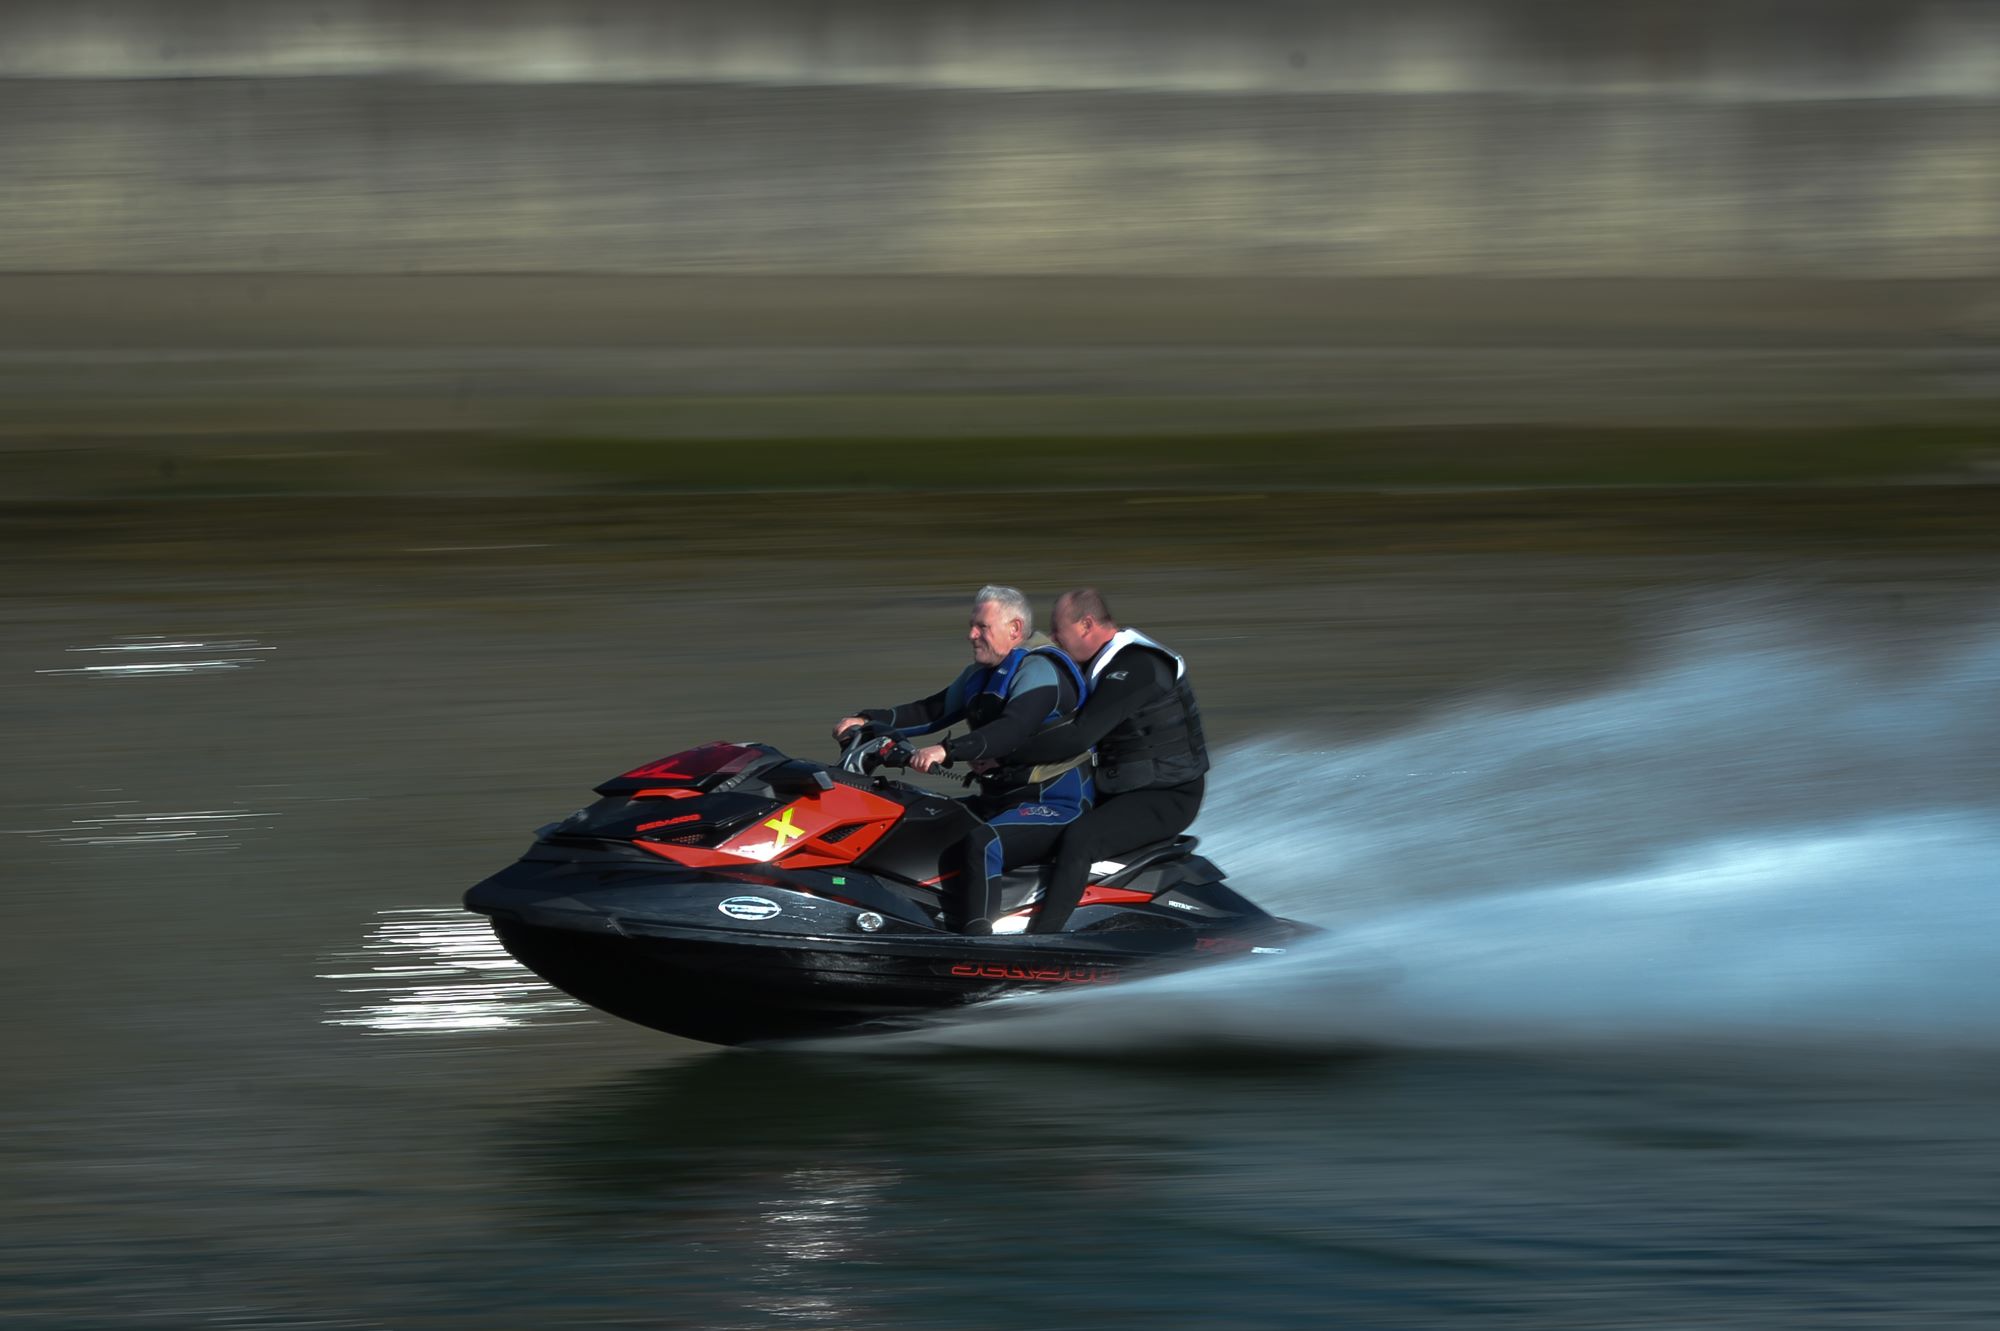 2 men riding on a black and red jet ski in a large body of water wearing black jackets and pants.